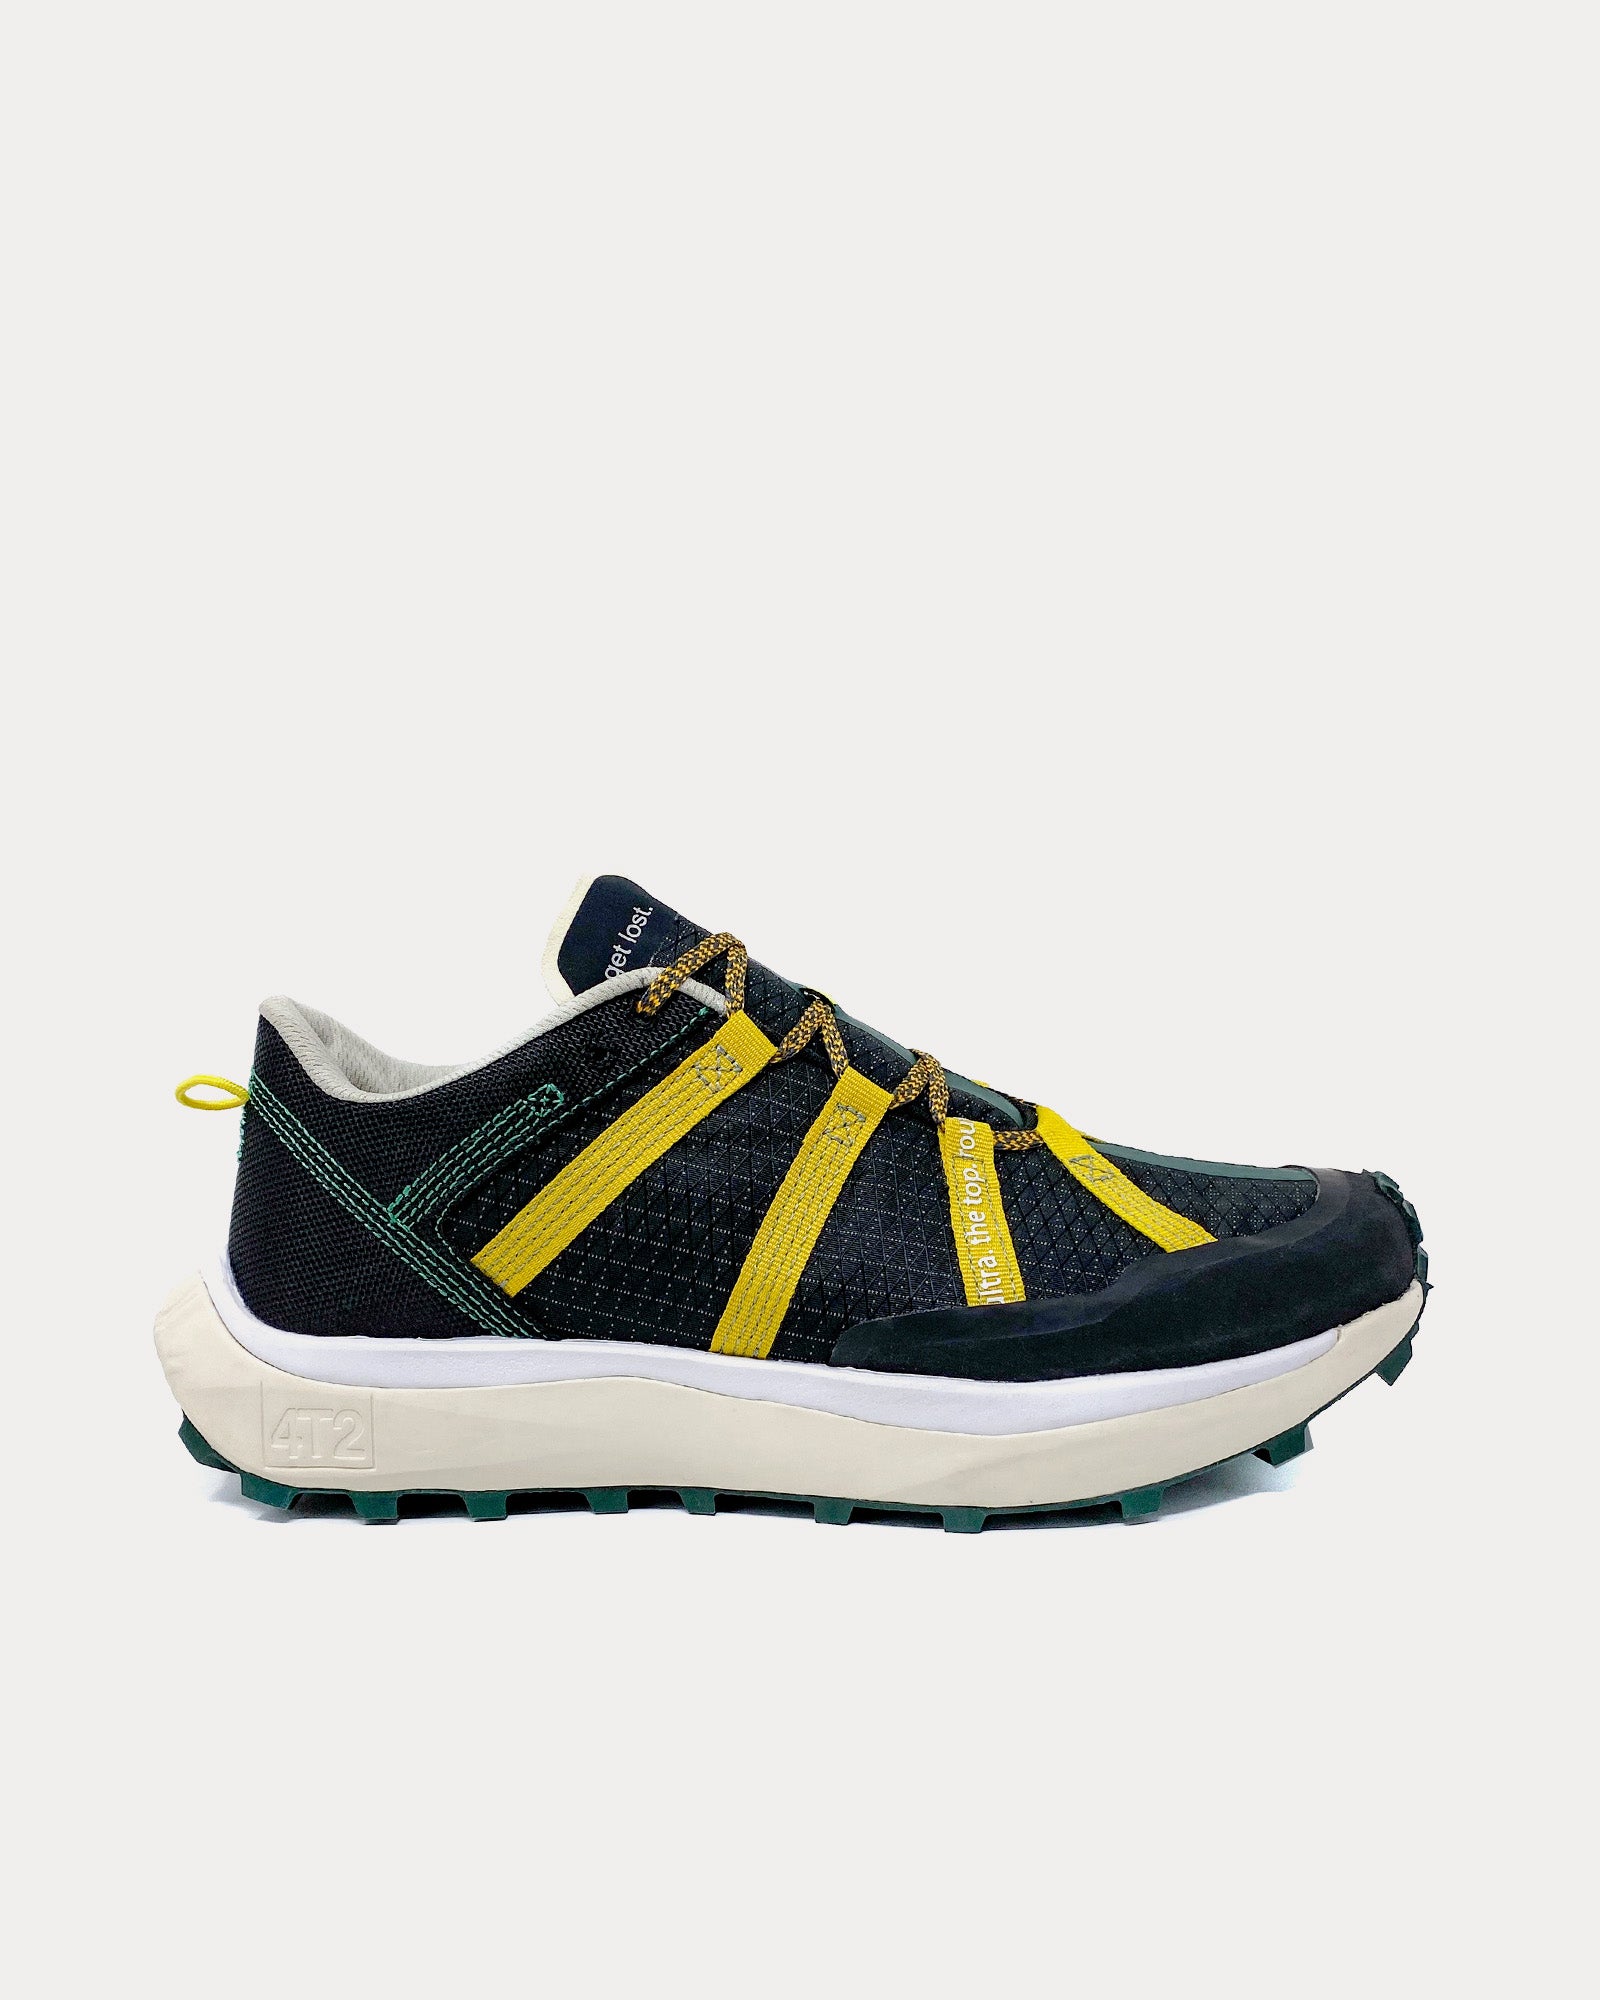 4T2 - Get Lost Black / Yellow Running Shoes